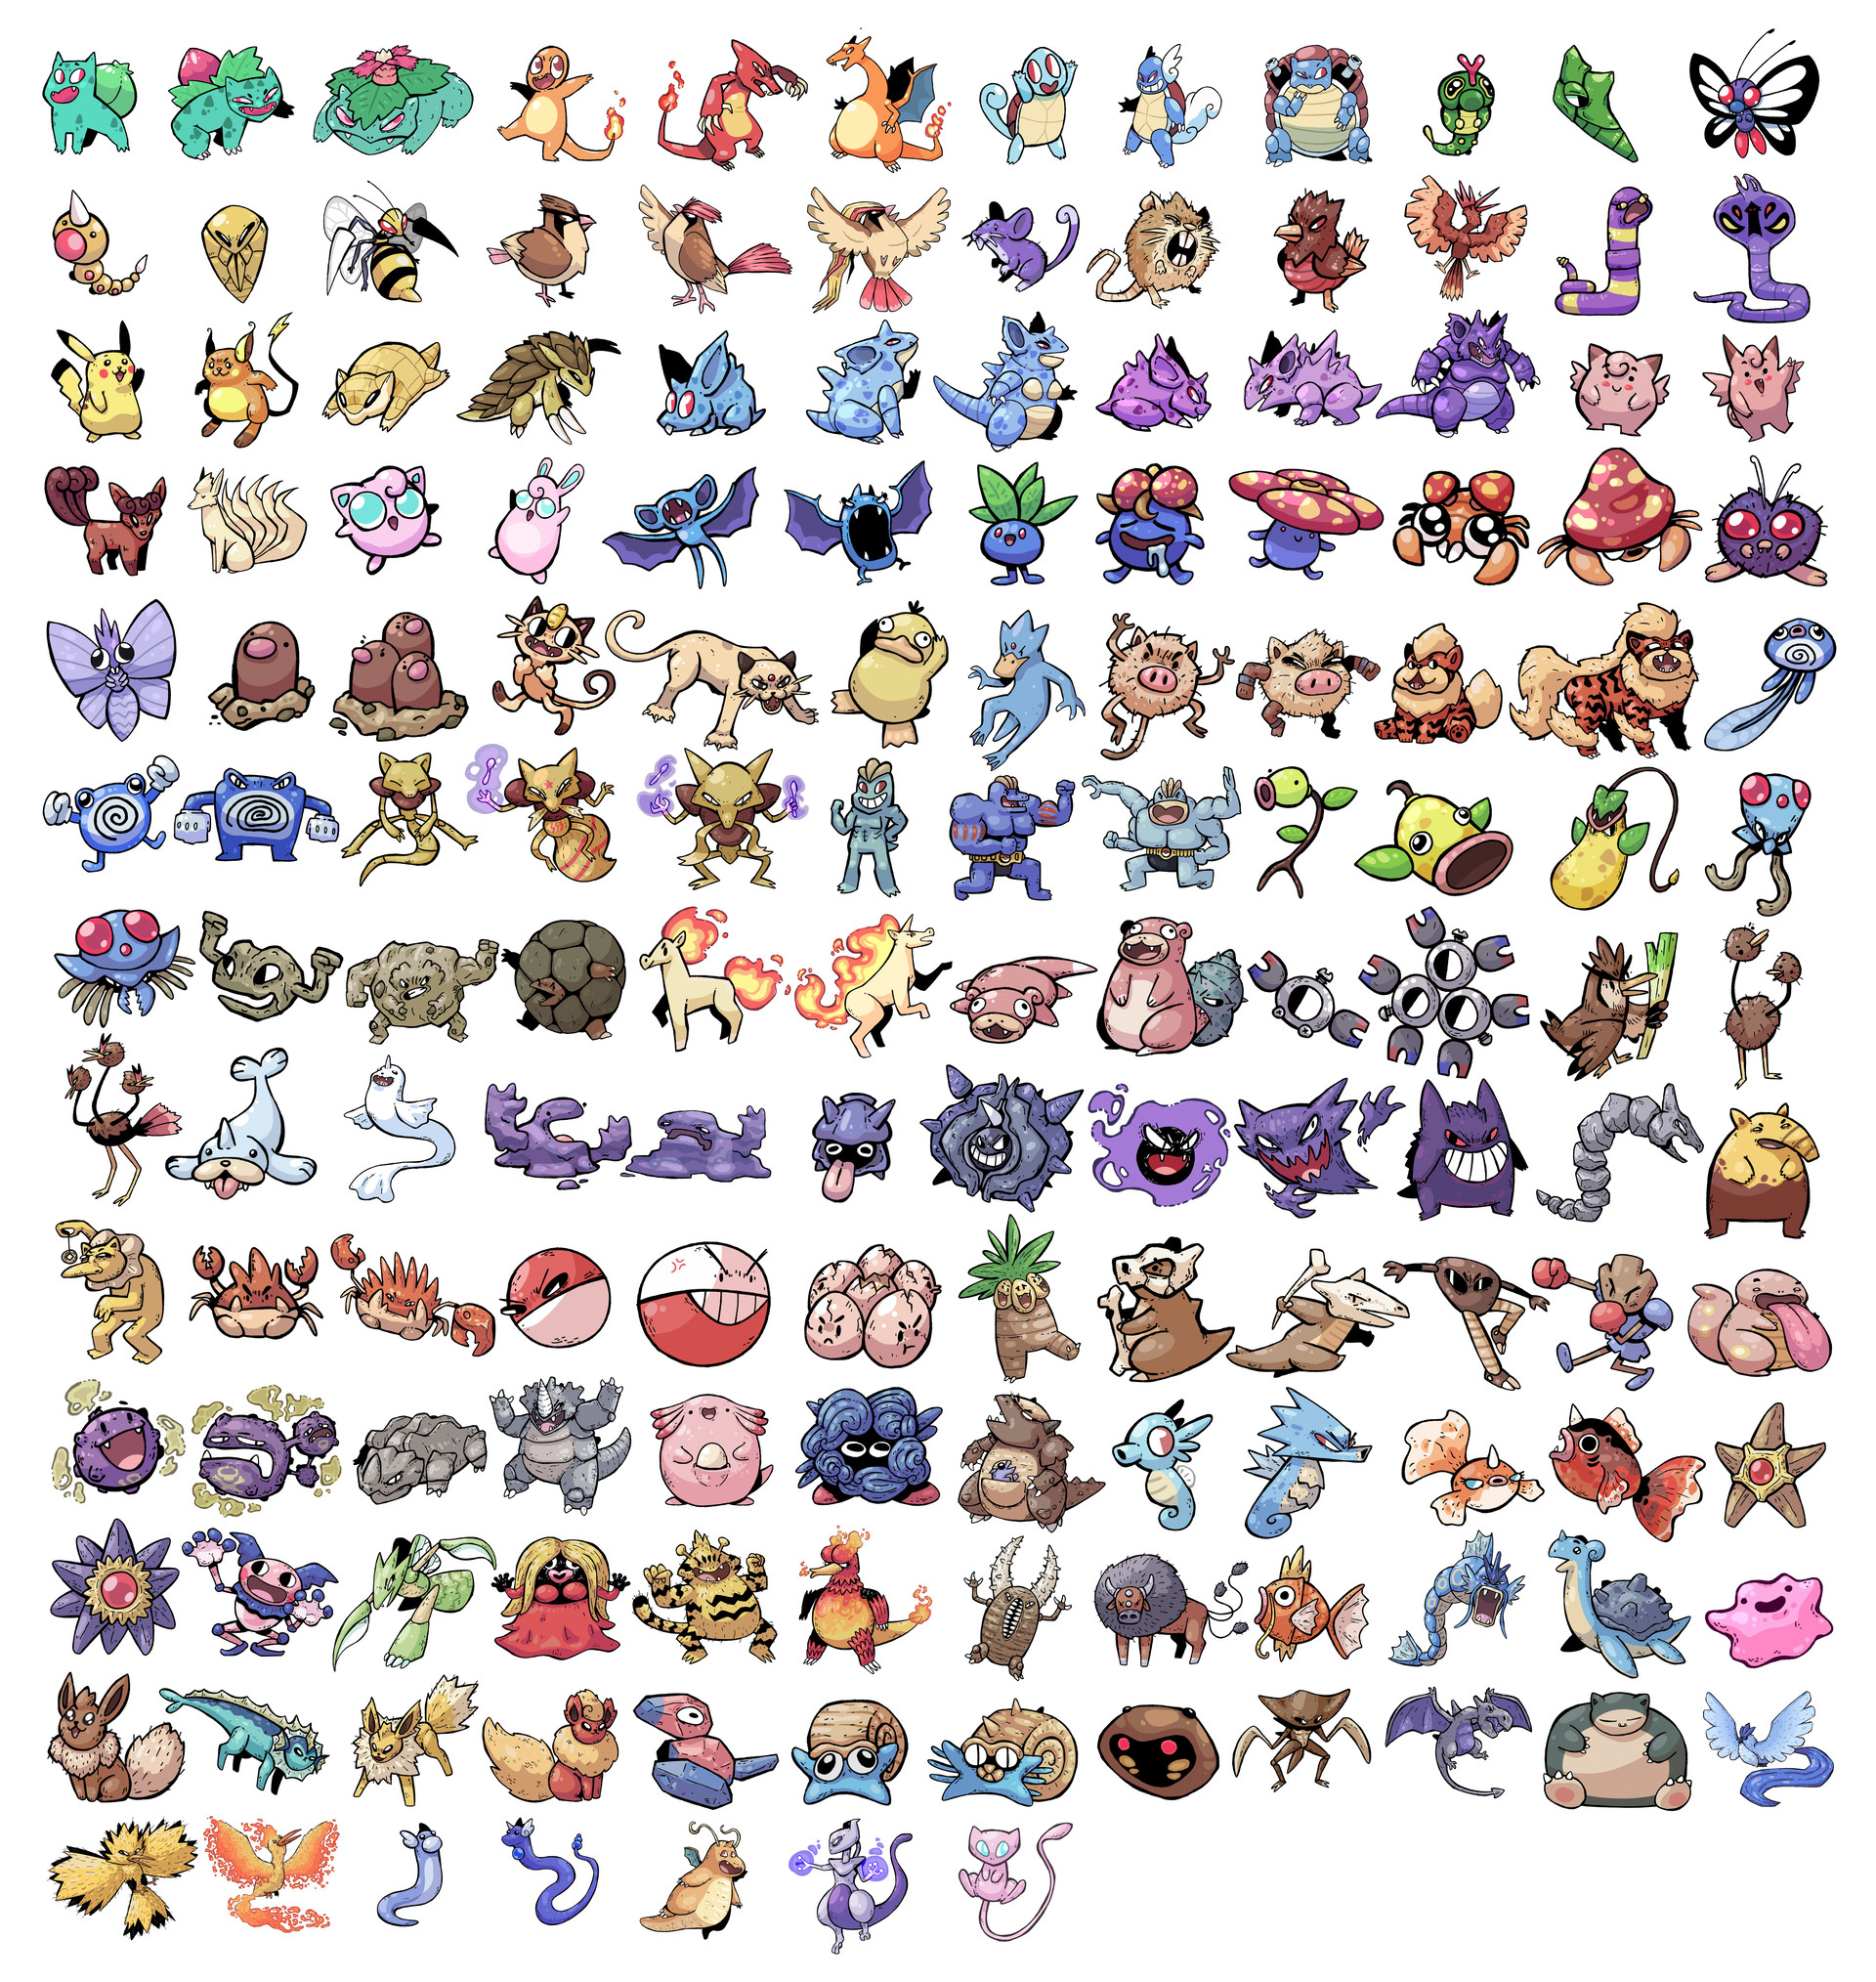 Diego Rosales - 151 Pokemon from memory